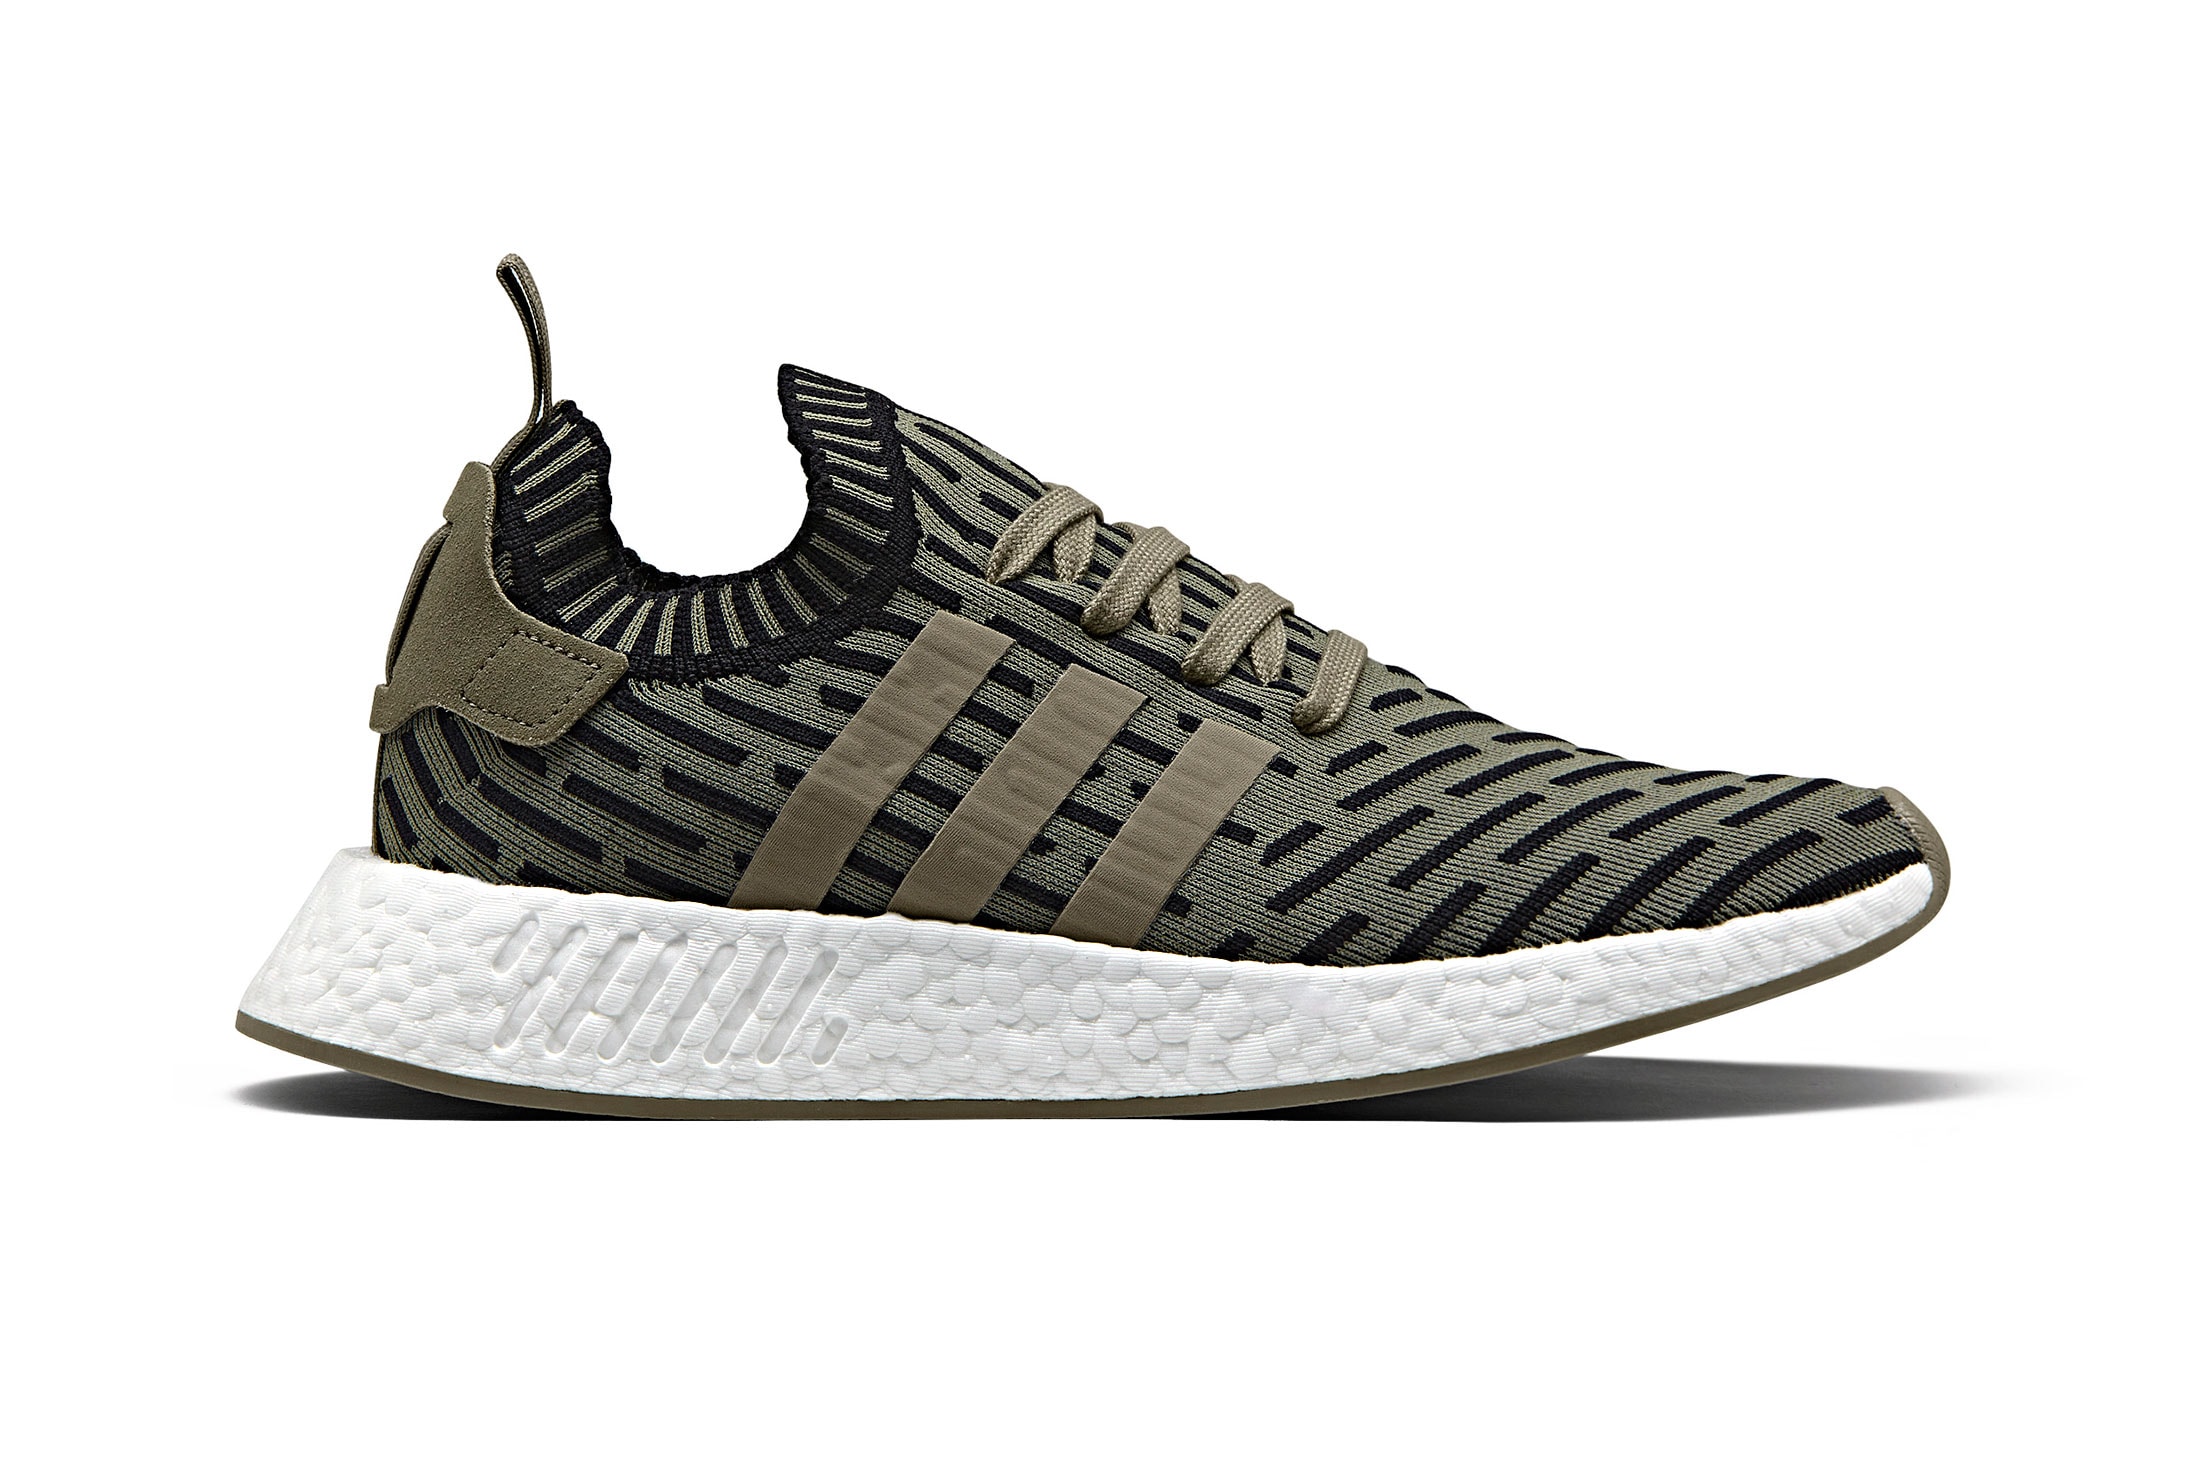 adidas Originals NMD_R2 Olive green white boost sole